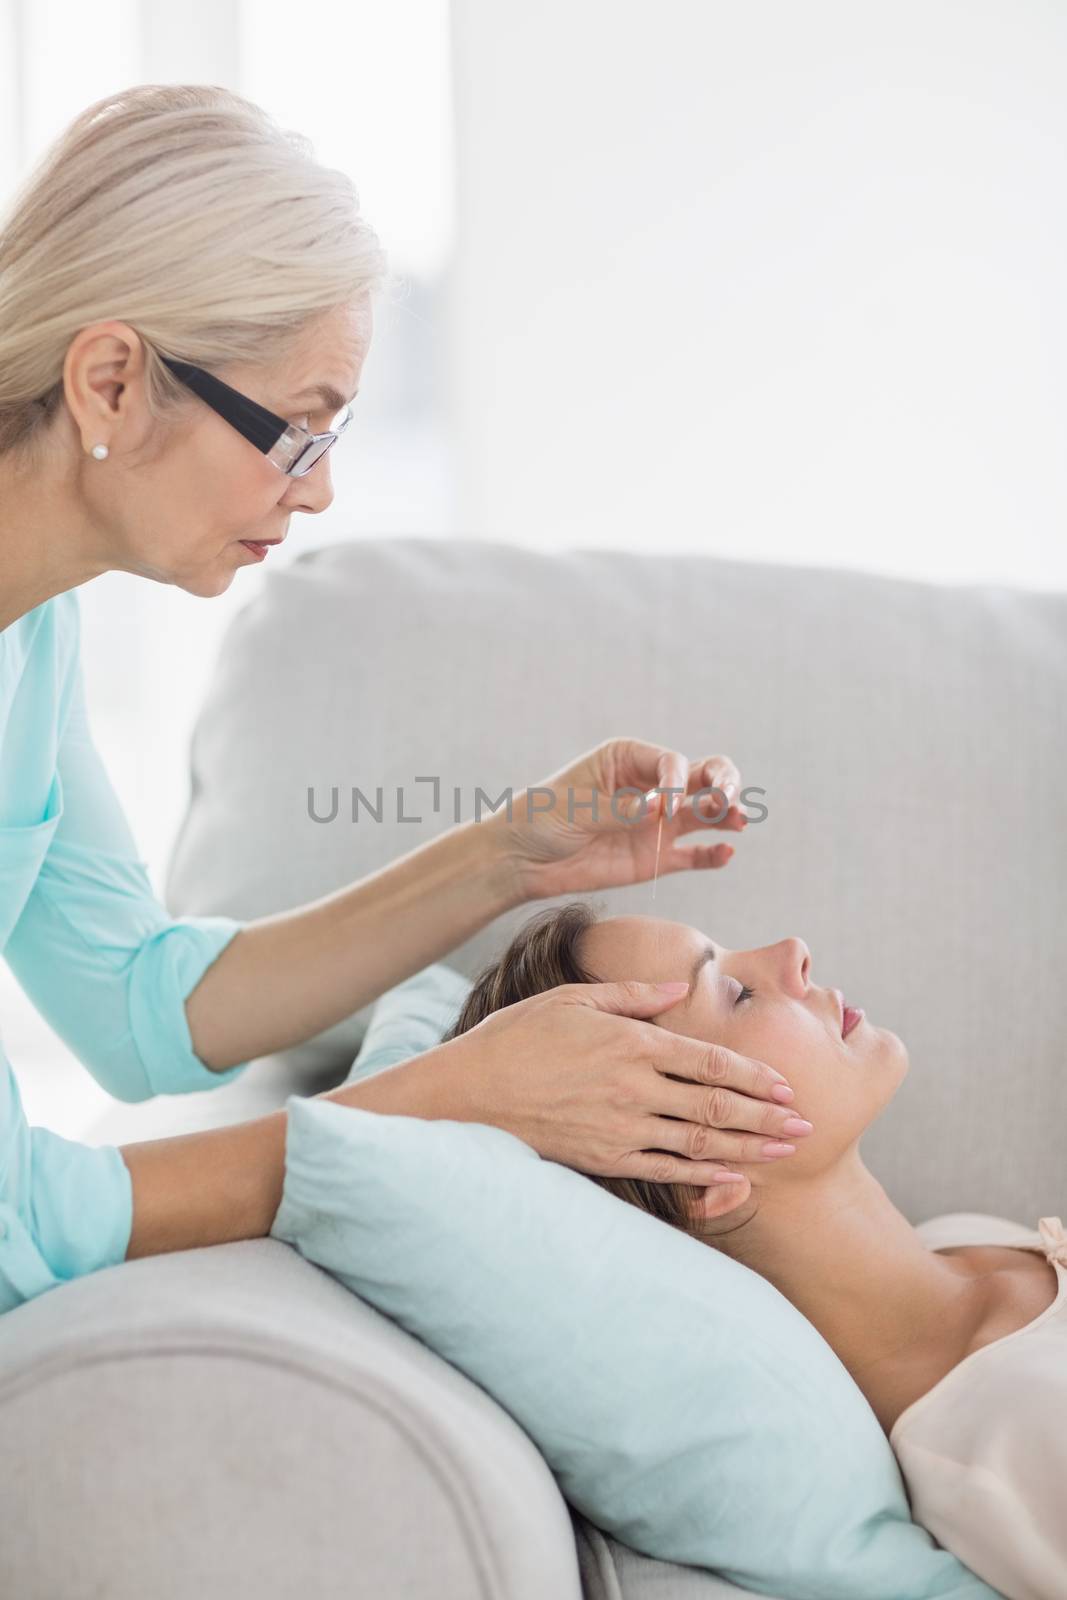 Woman receiving acupuncture treatment by Wavebreakmedia